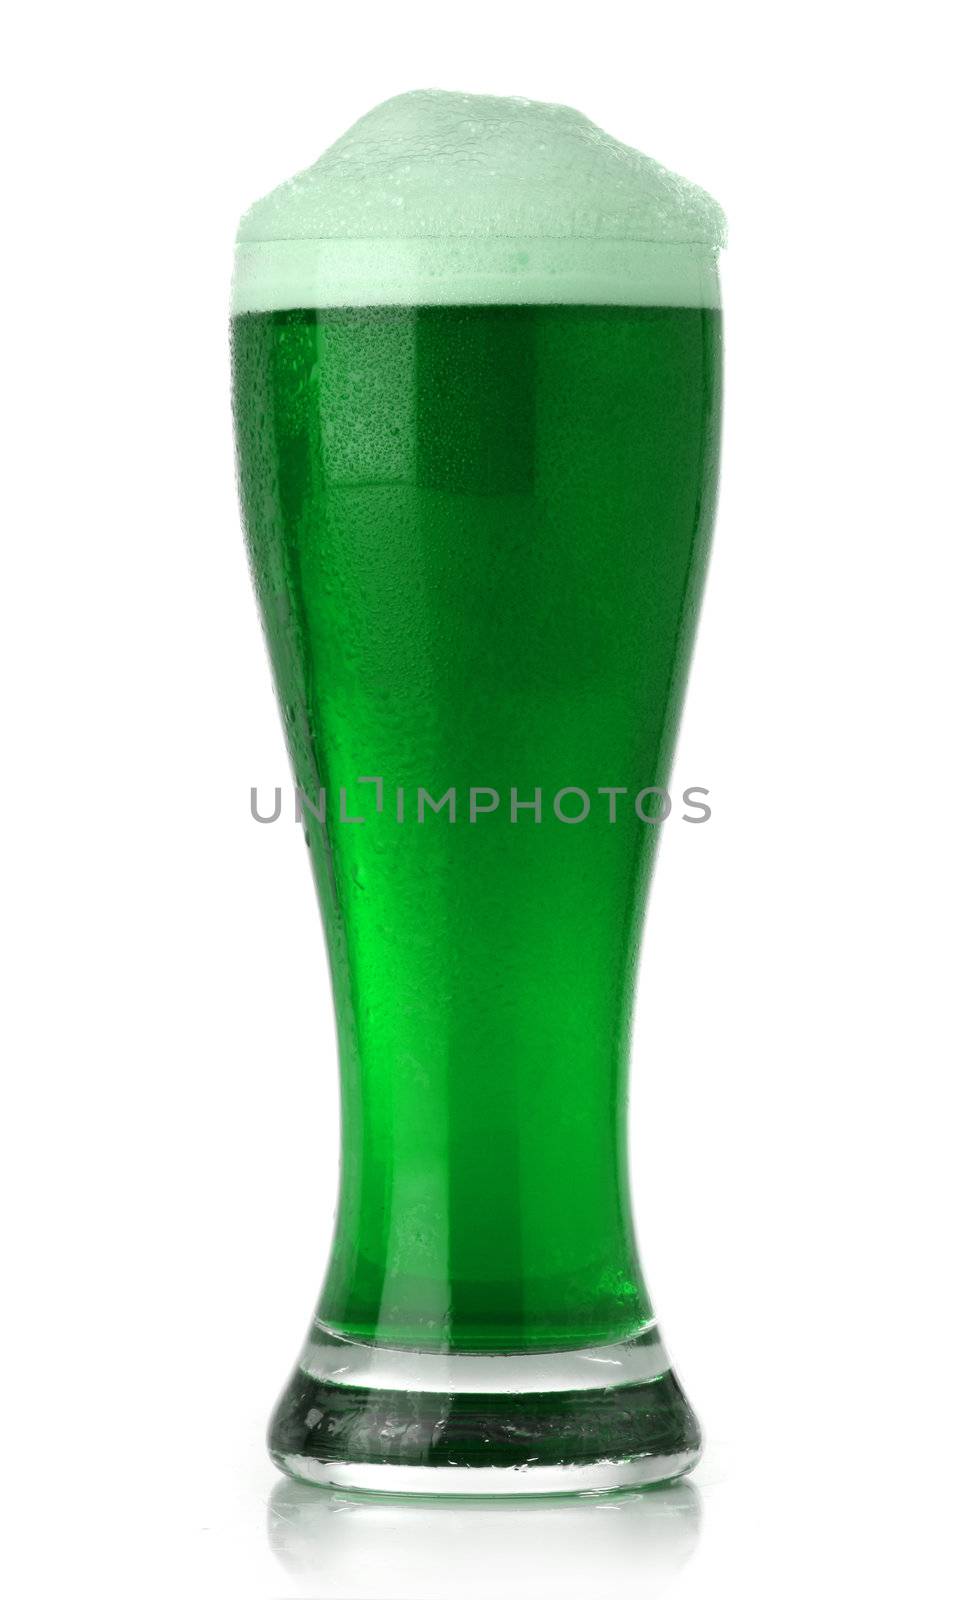 St. Patrick's Day green beer